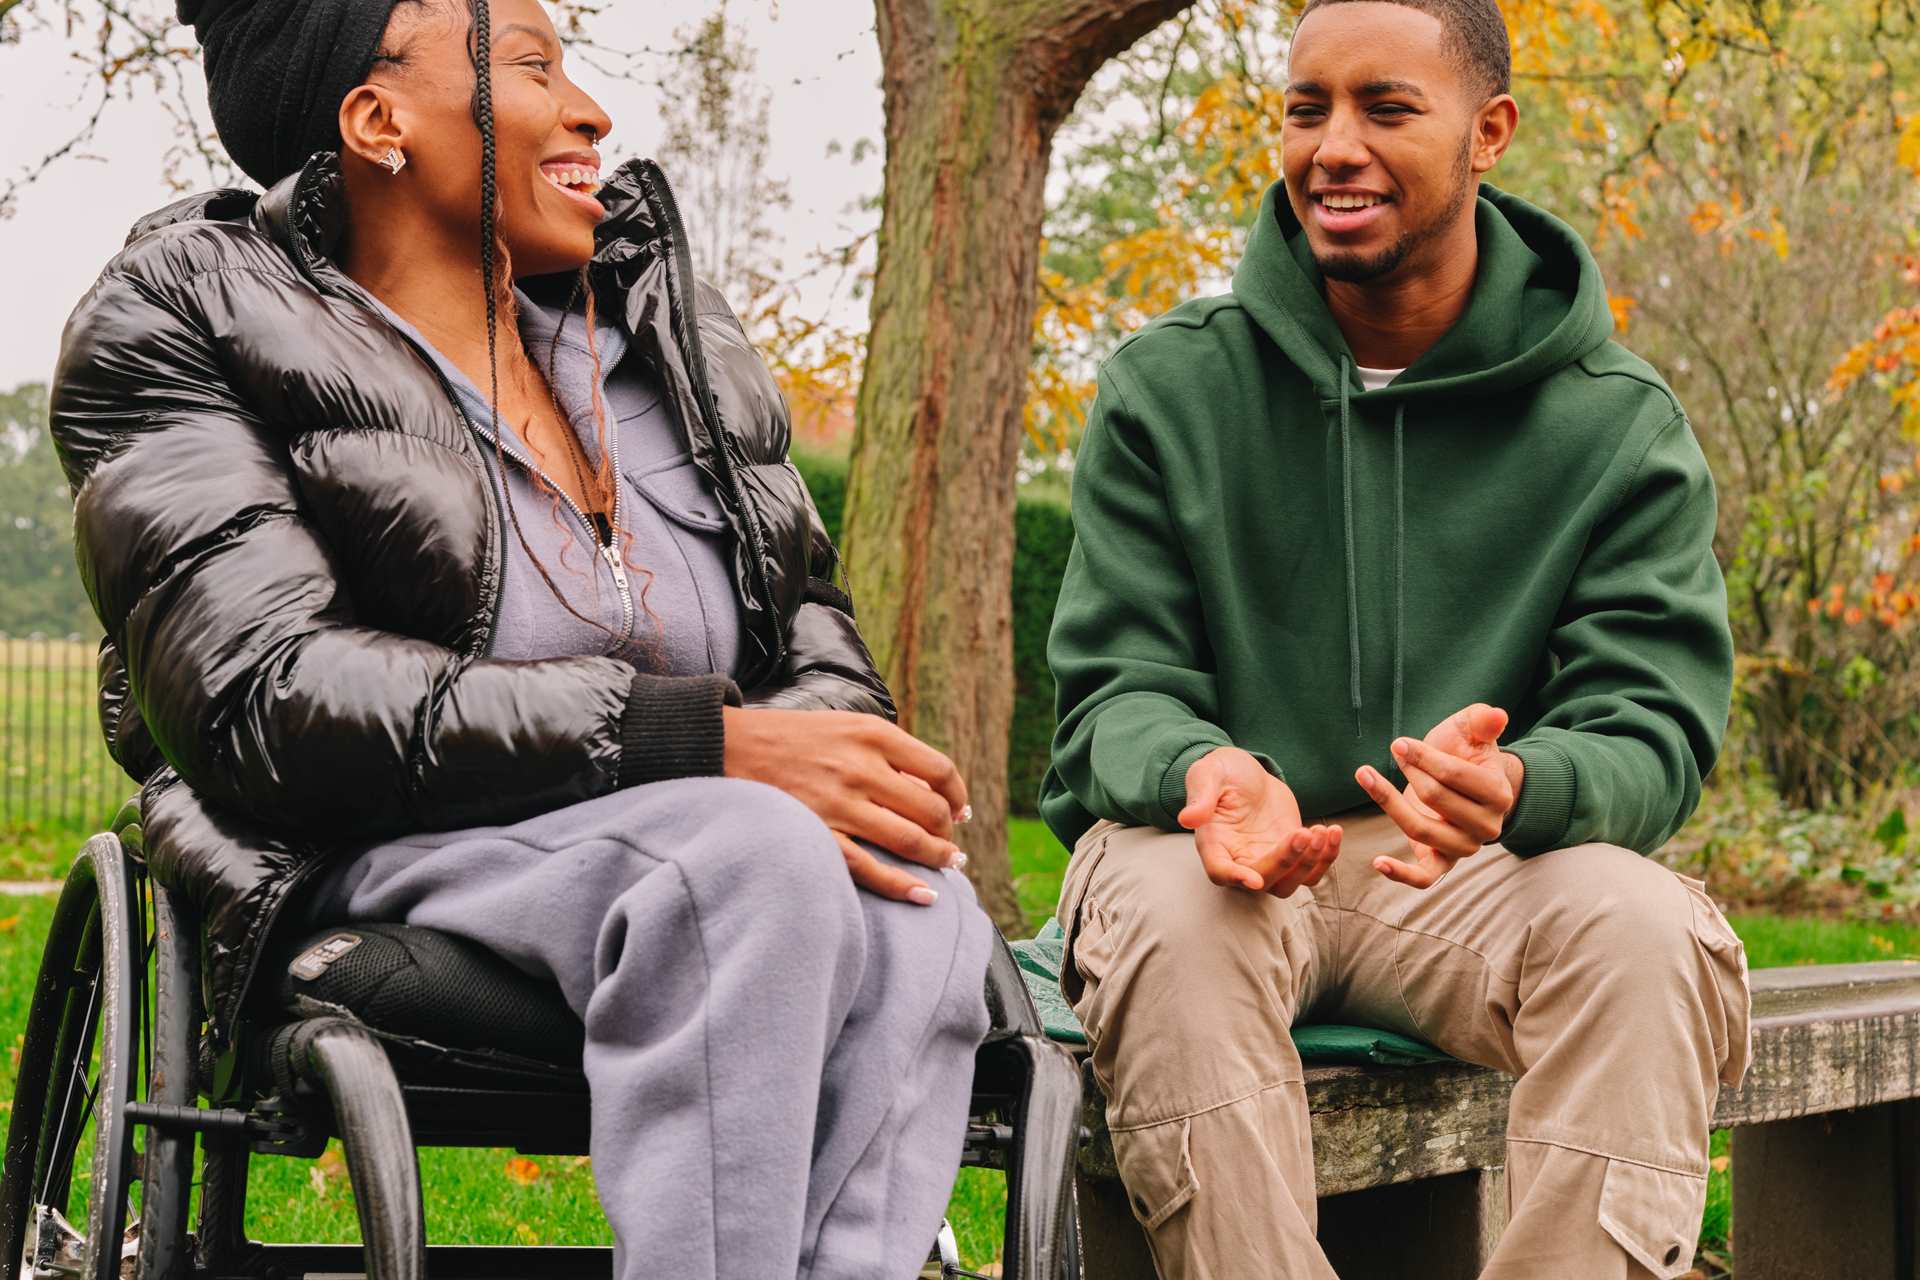 A young Black woman in a wheelchair and a young Black man on a bench. They are talking and laughing together.